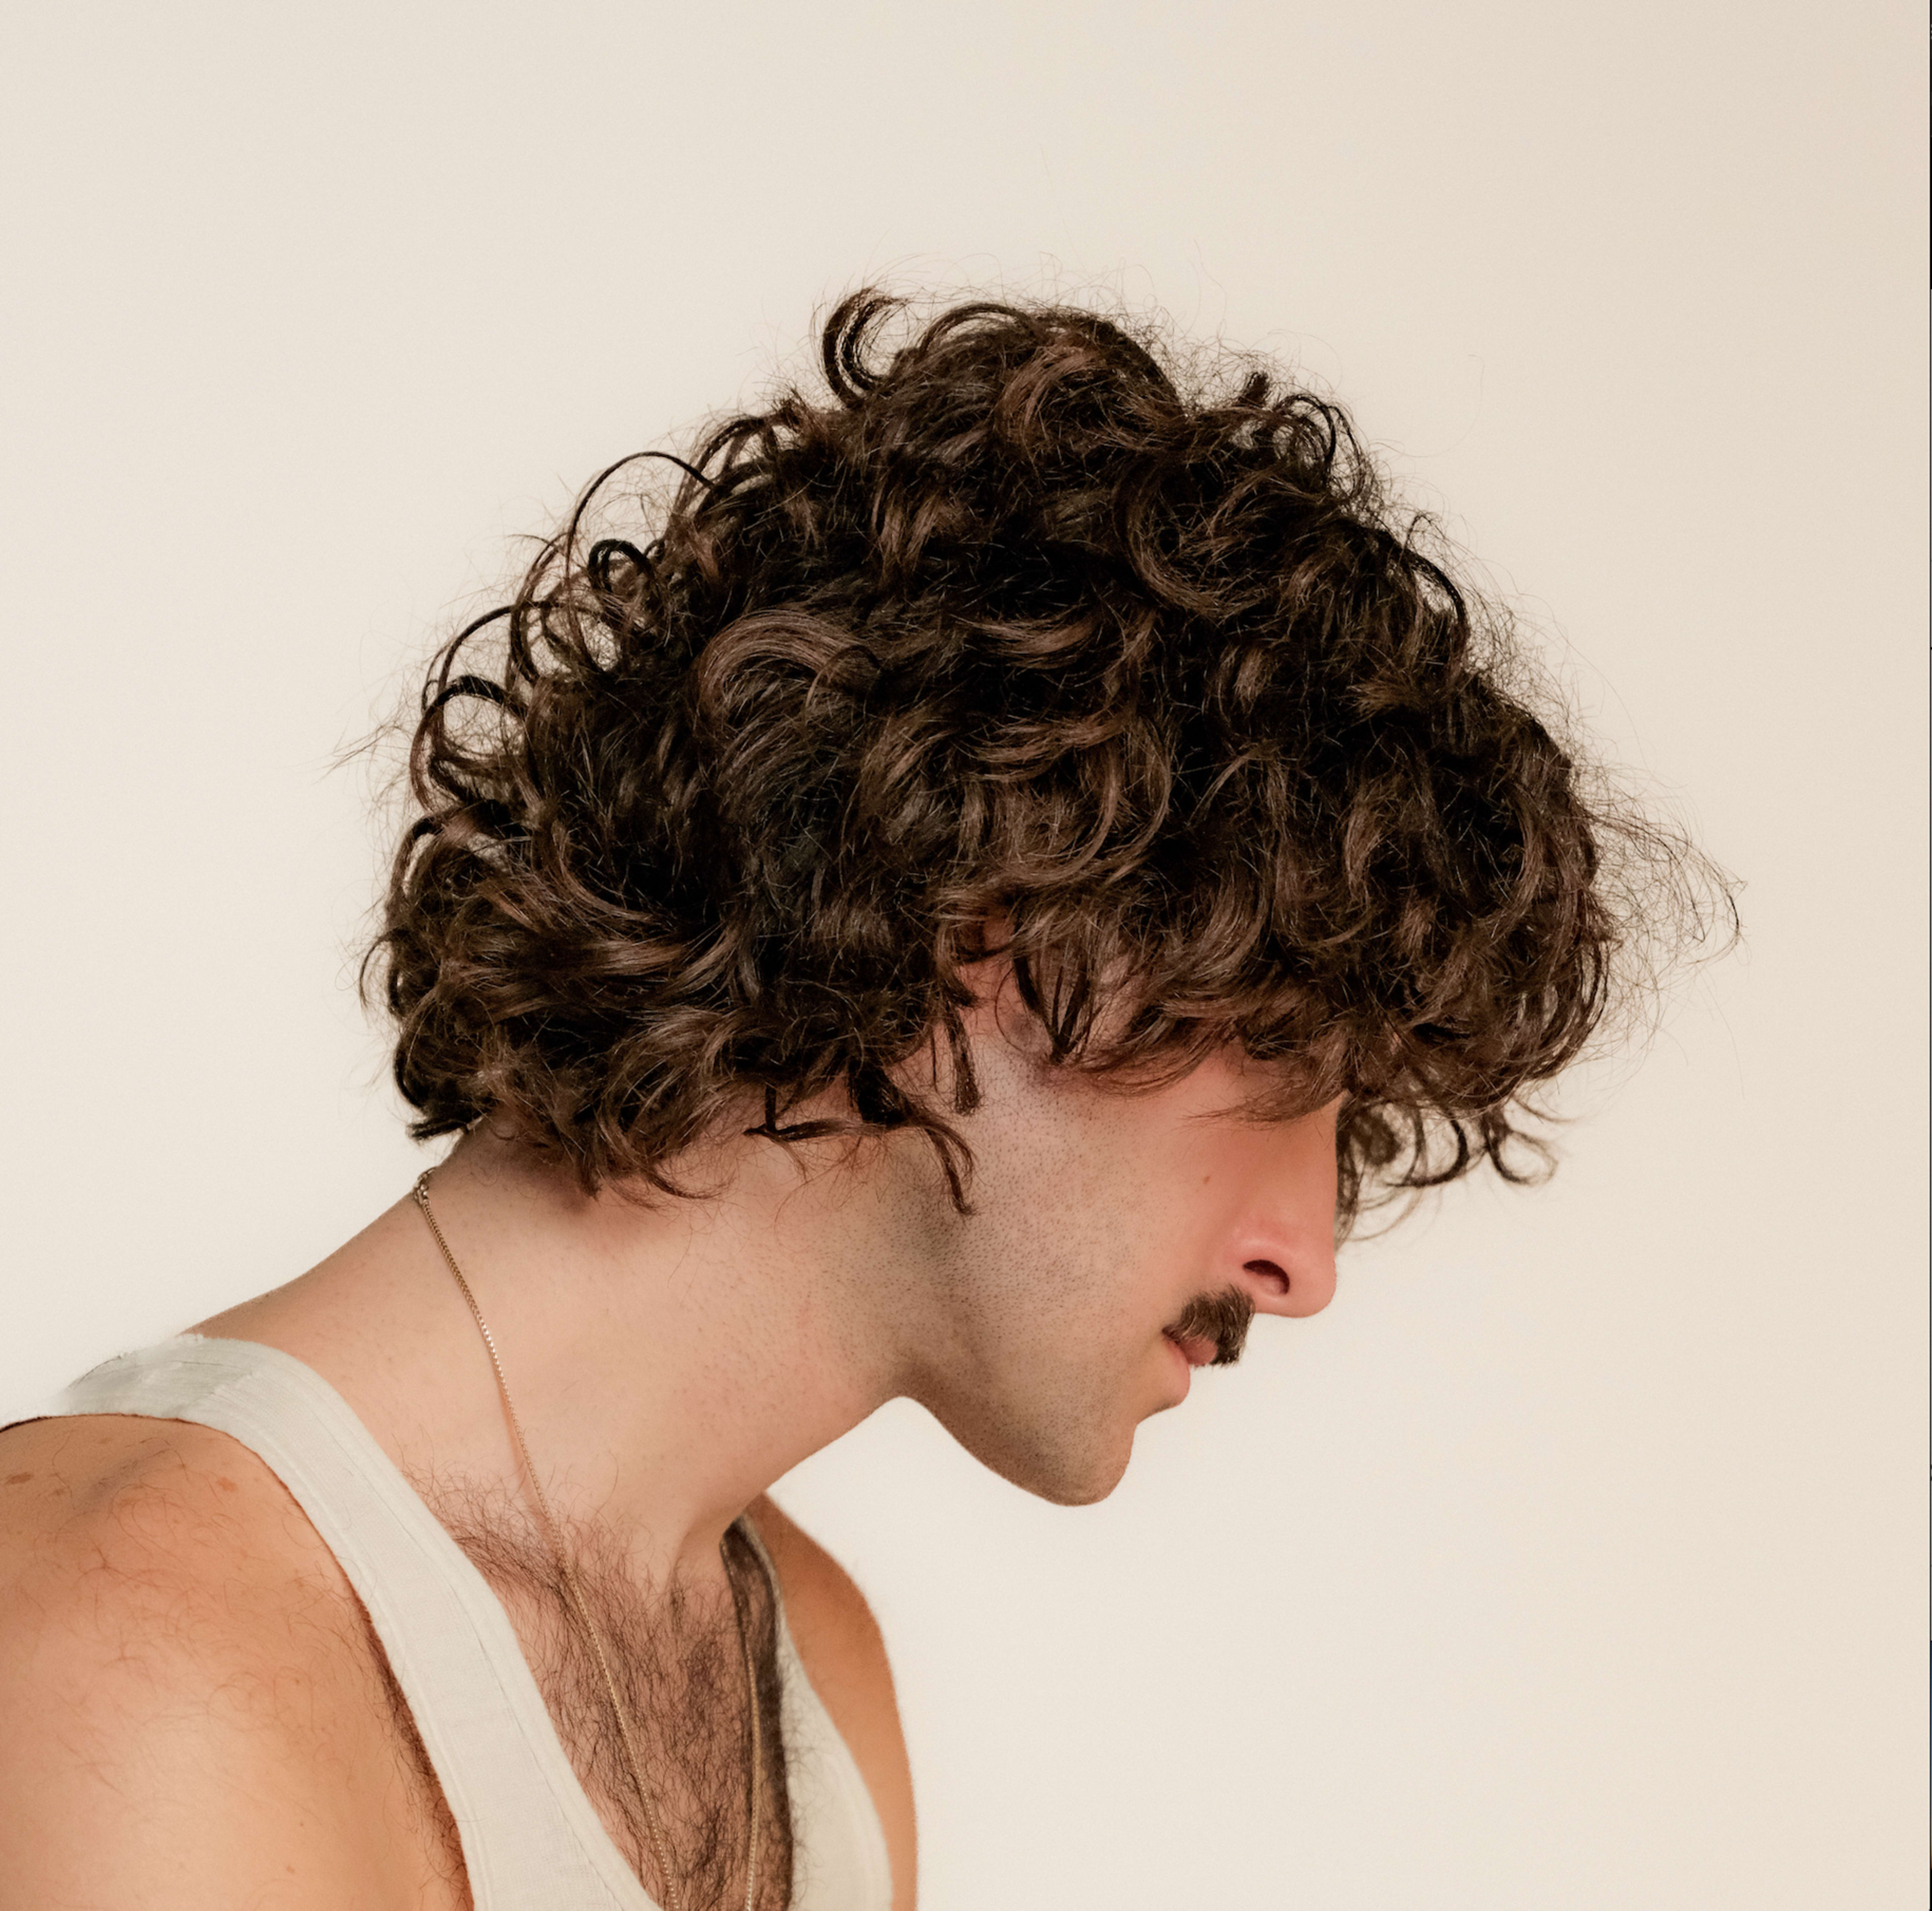 A man with curly brown hair and a moustache for a photoshoot.